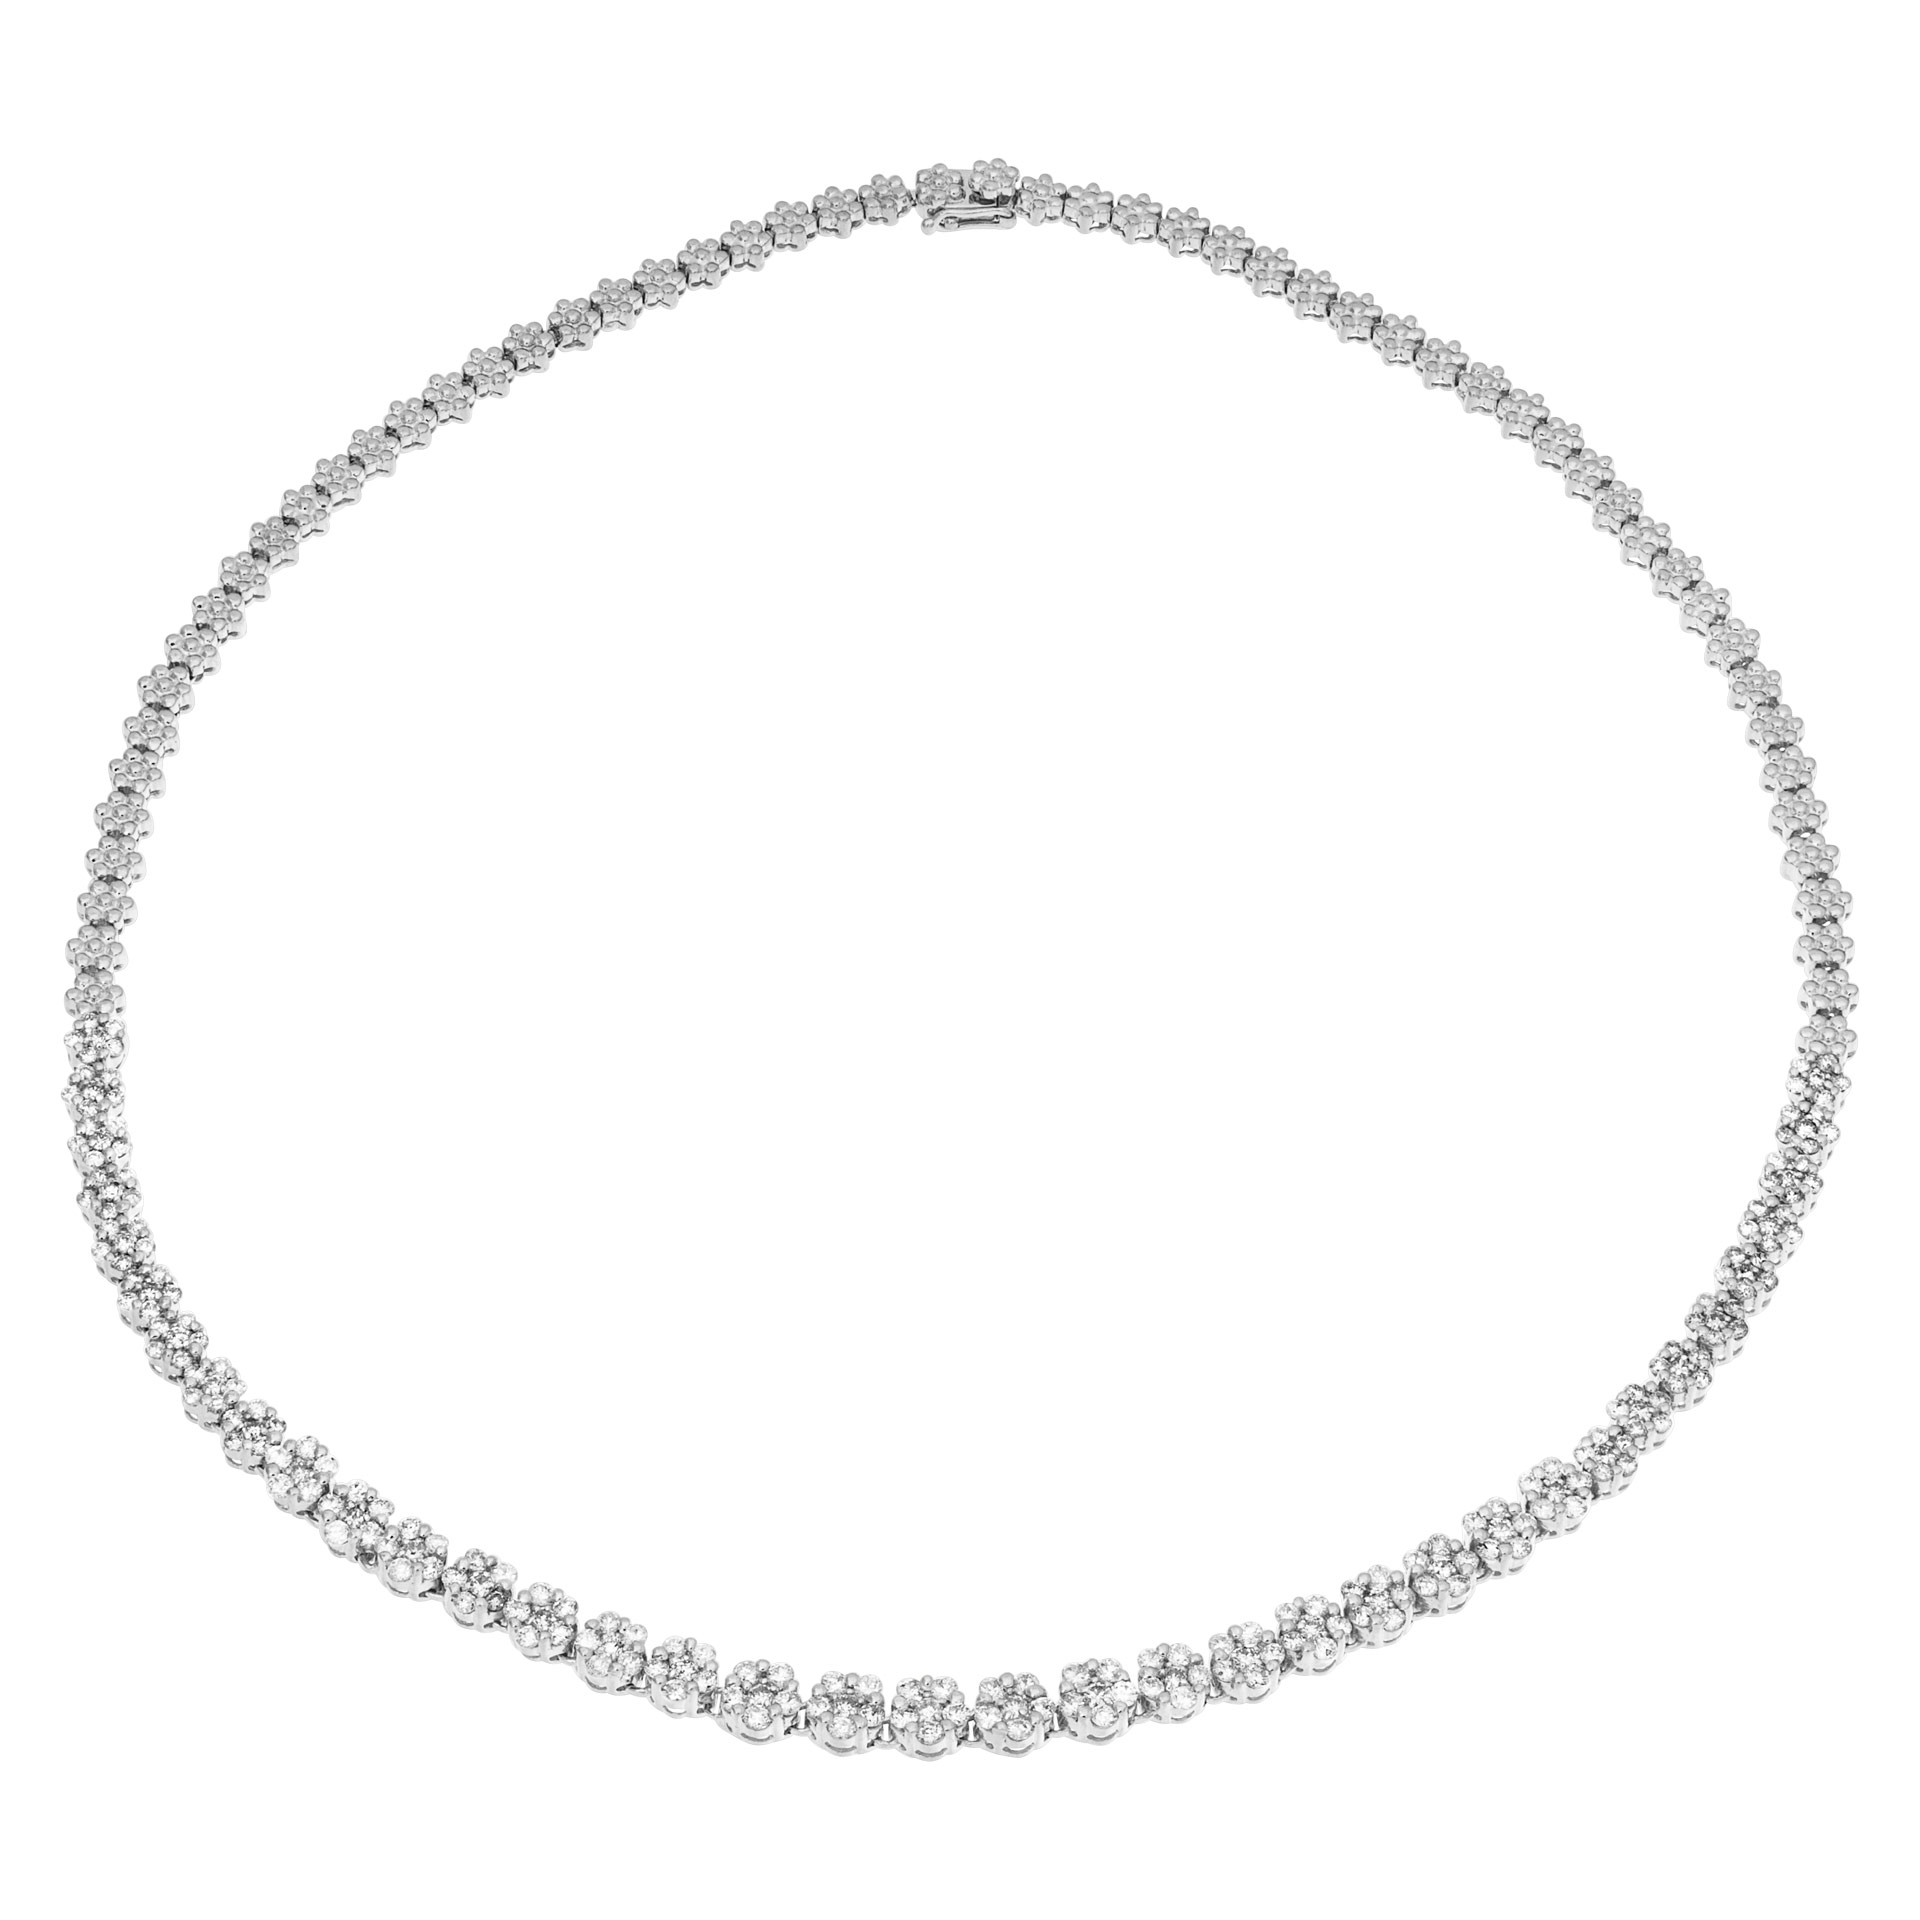 Flower design diamond necklace in 14k white gold. 4.00cts in round brilliant dia's image 5